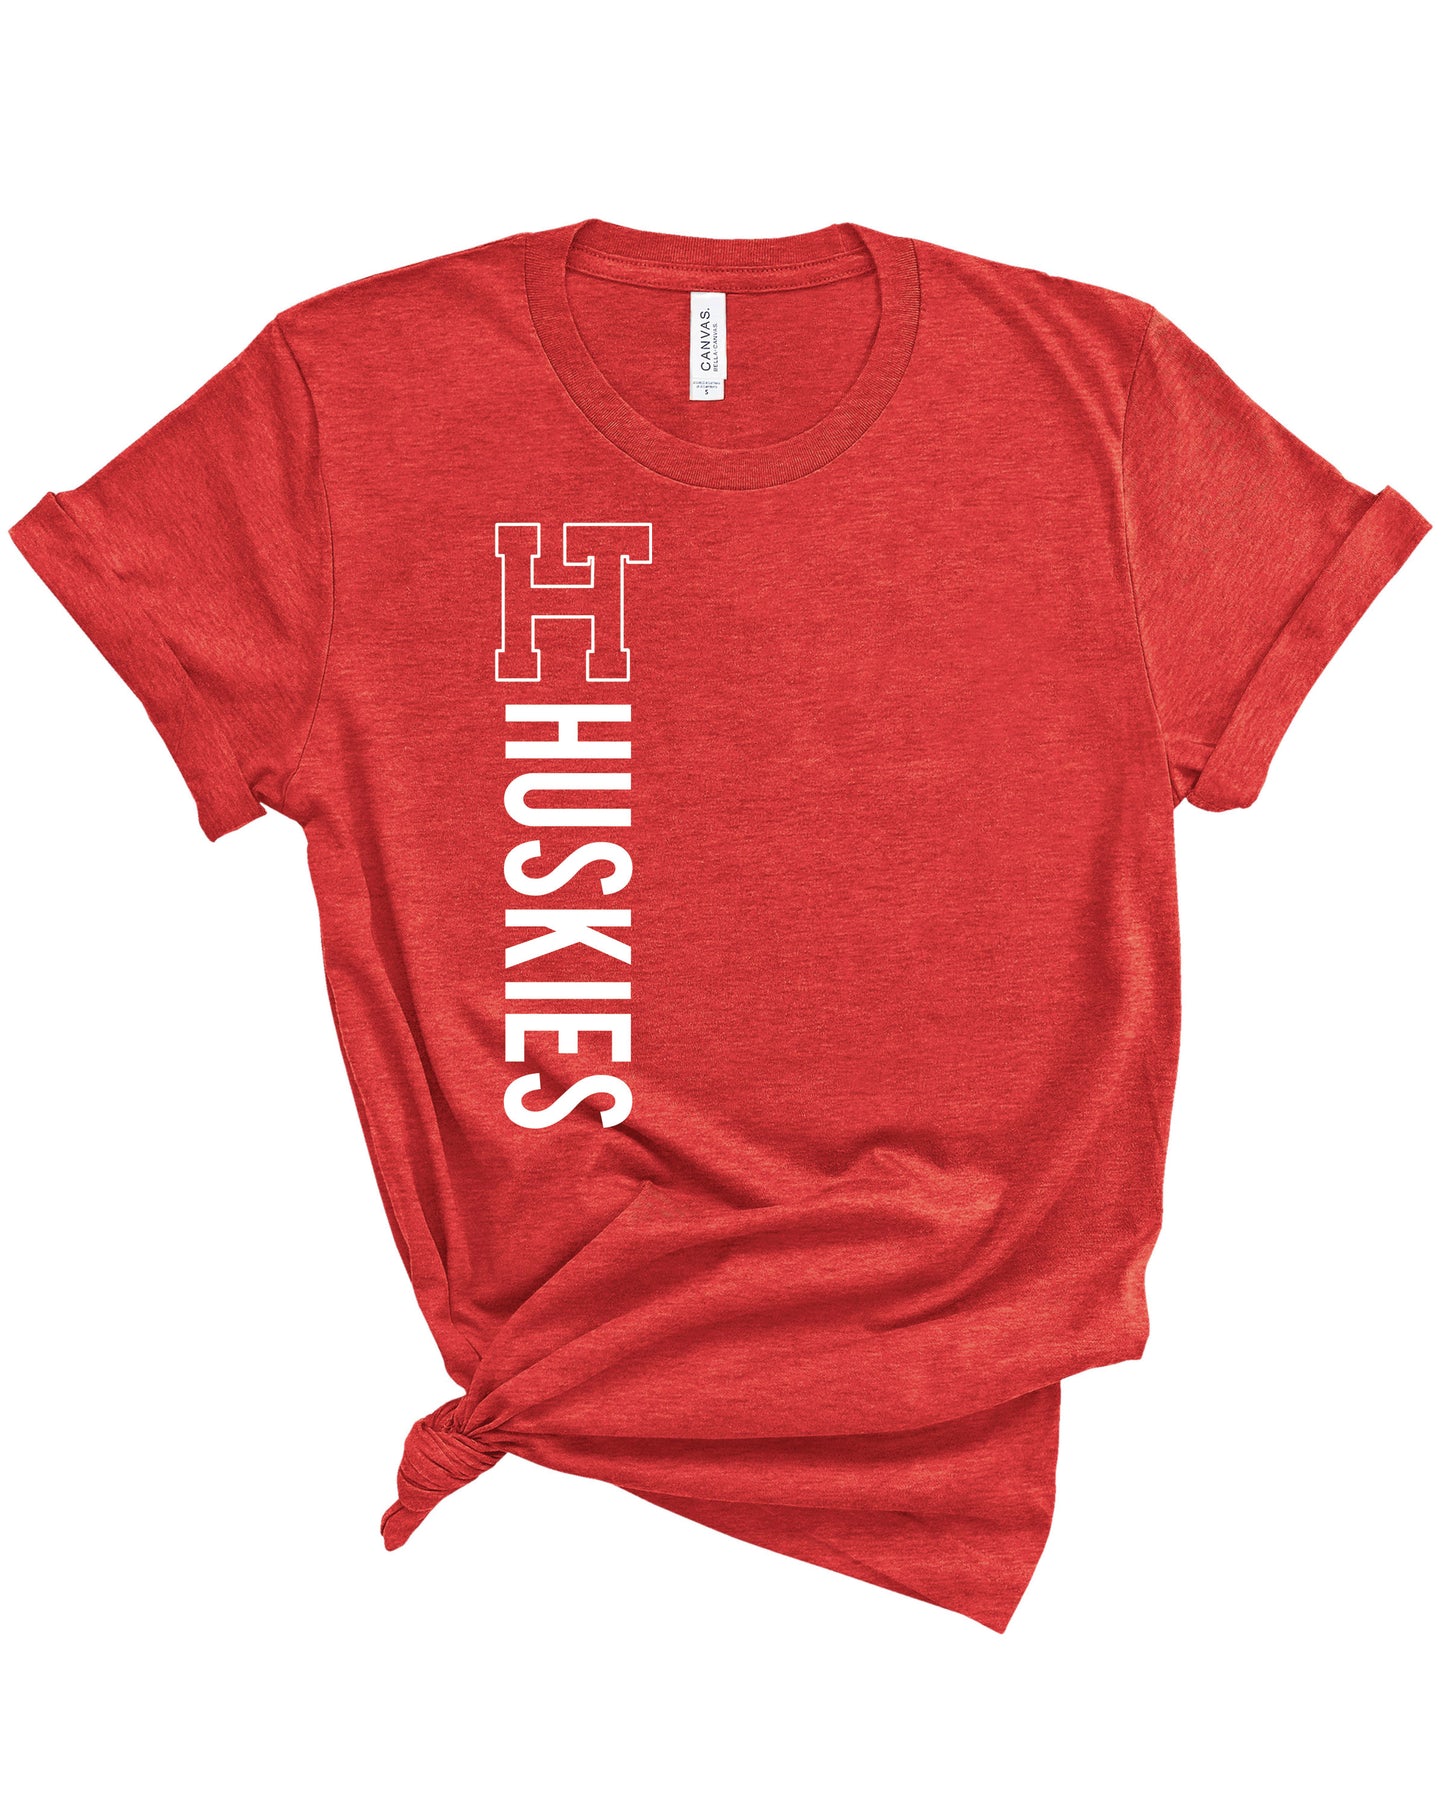 HT Huskies Vertical | Kids Tee | RTS-Sister Shirts-Sister Shirts, Cute & Custom Tees for Mama & Littles in Trussville, Alabama.